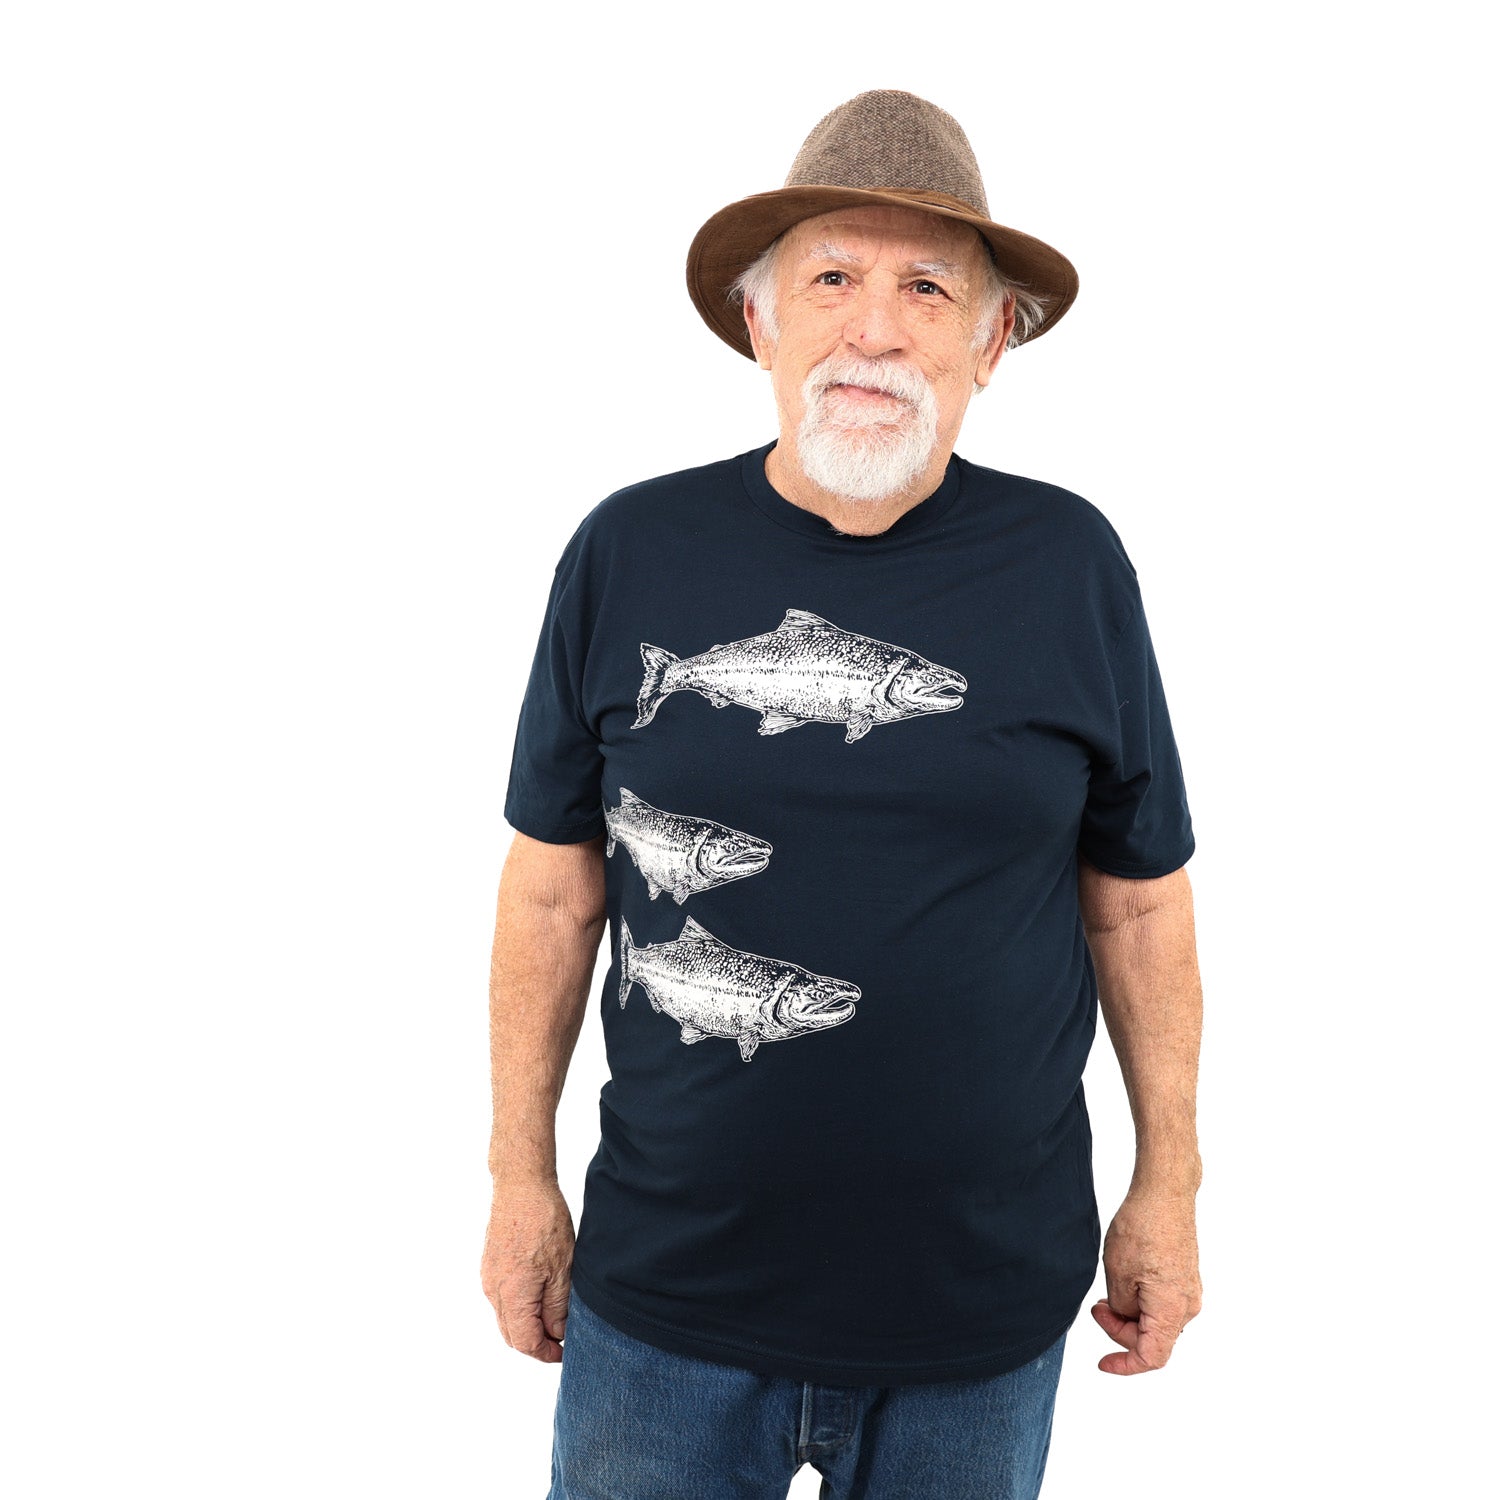 Older man wearing hat smiling to the side with a dark blue T shirt with three white salmon prints